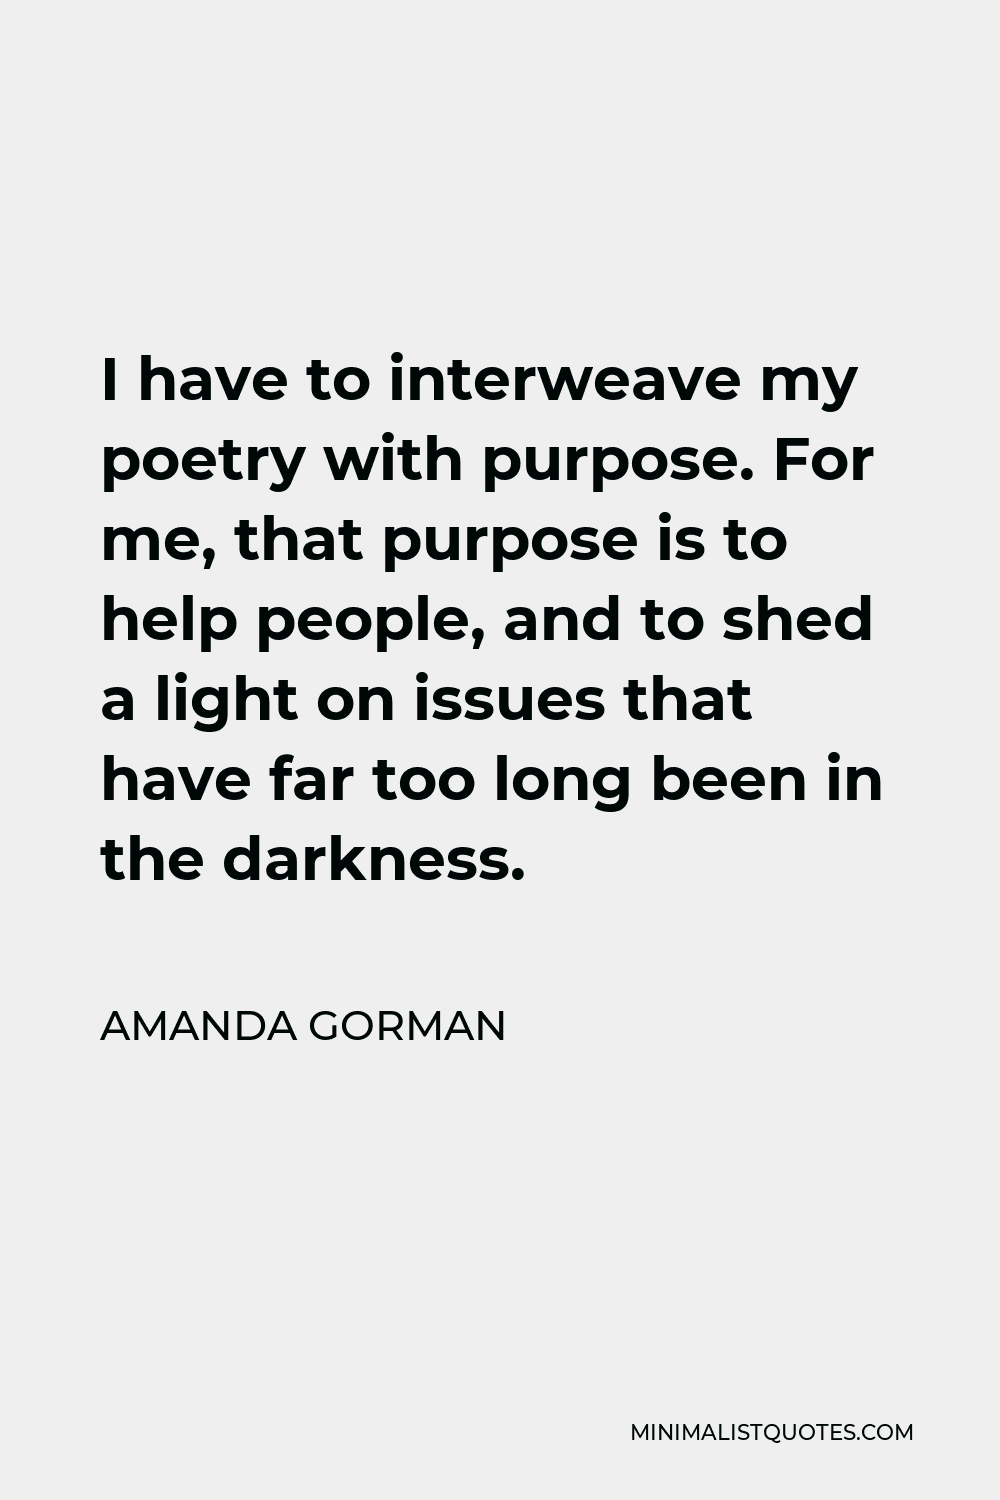 Amanda Gorman Quote - I have to interweave my poetry with purpose. For me, that purpose is to help people, and to shed a light on issues that have far too long been in the darkness.